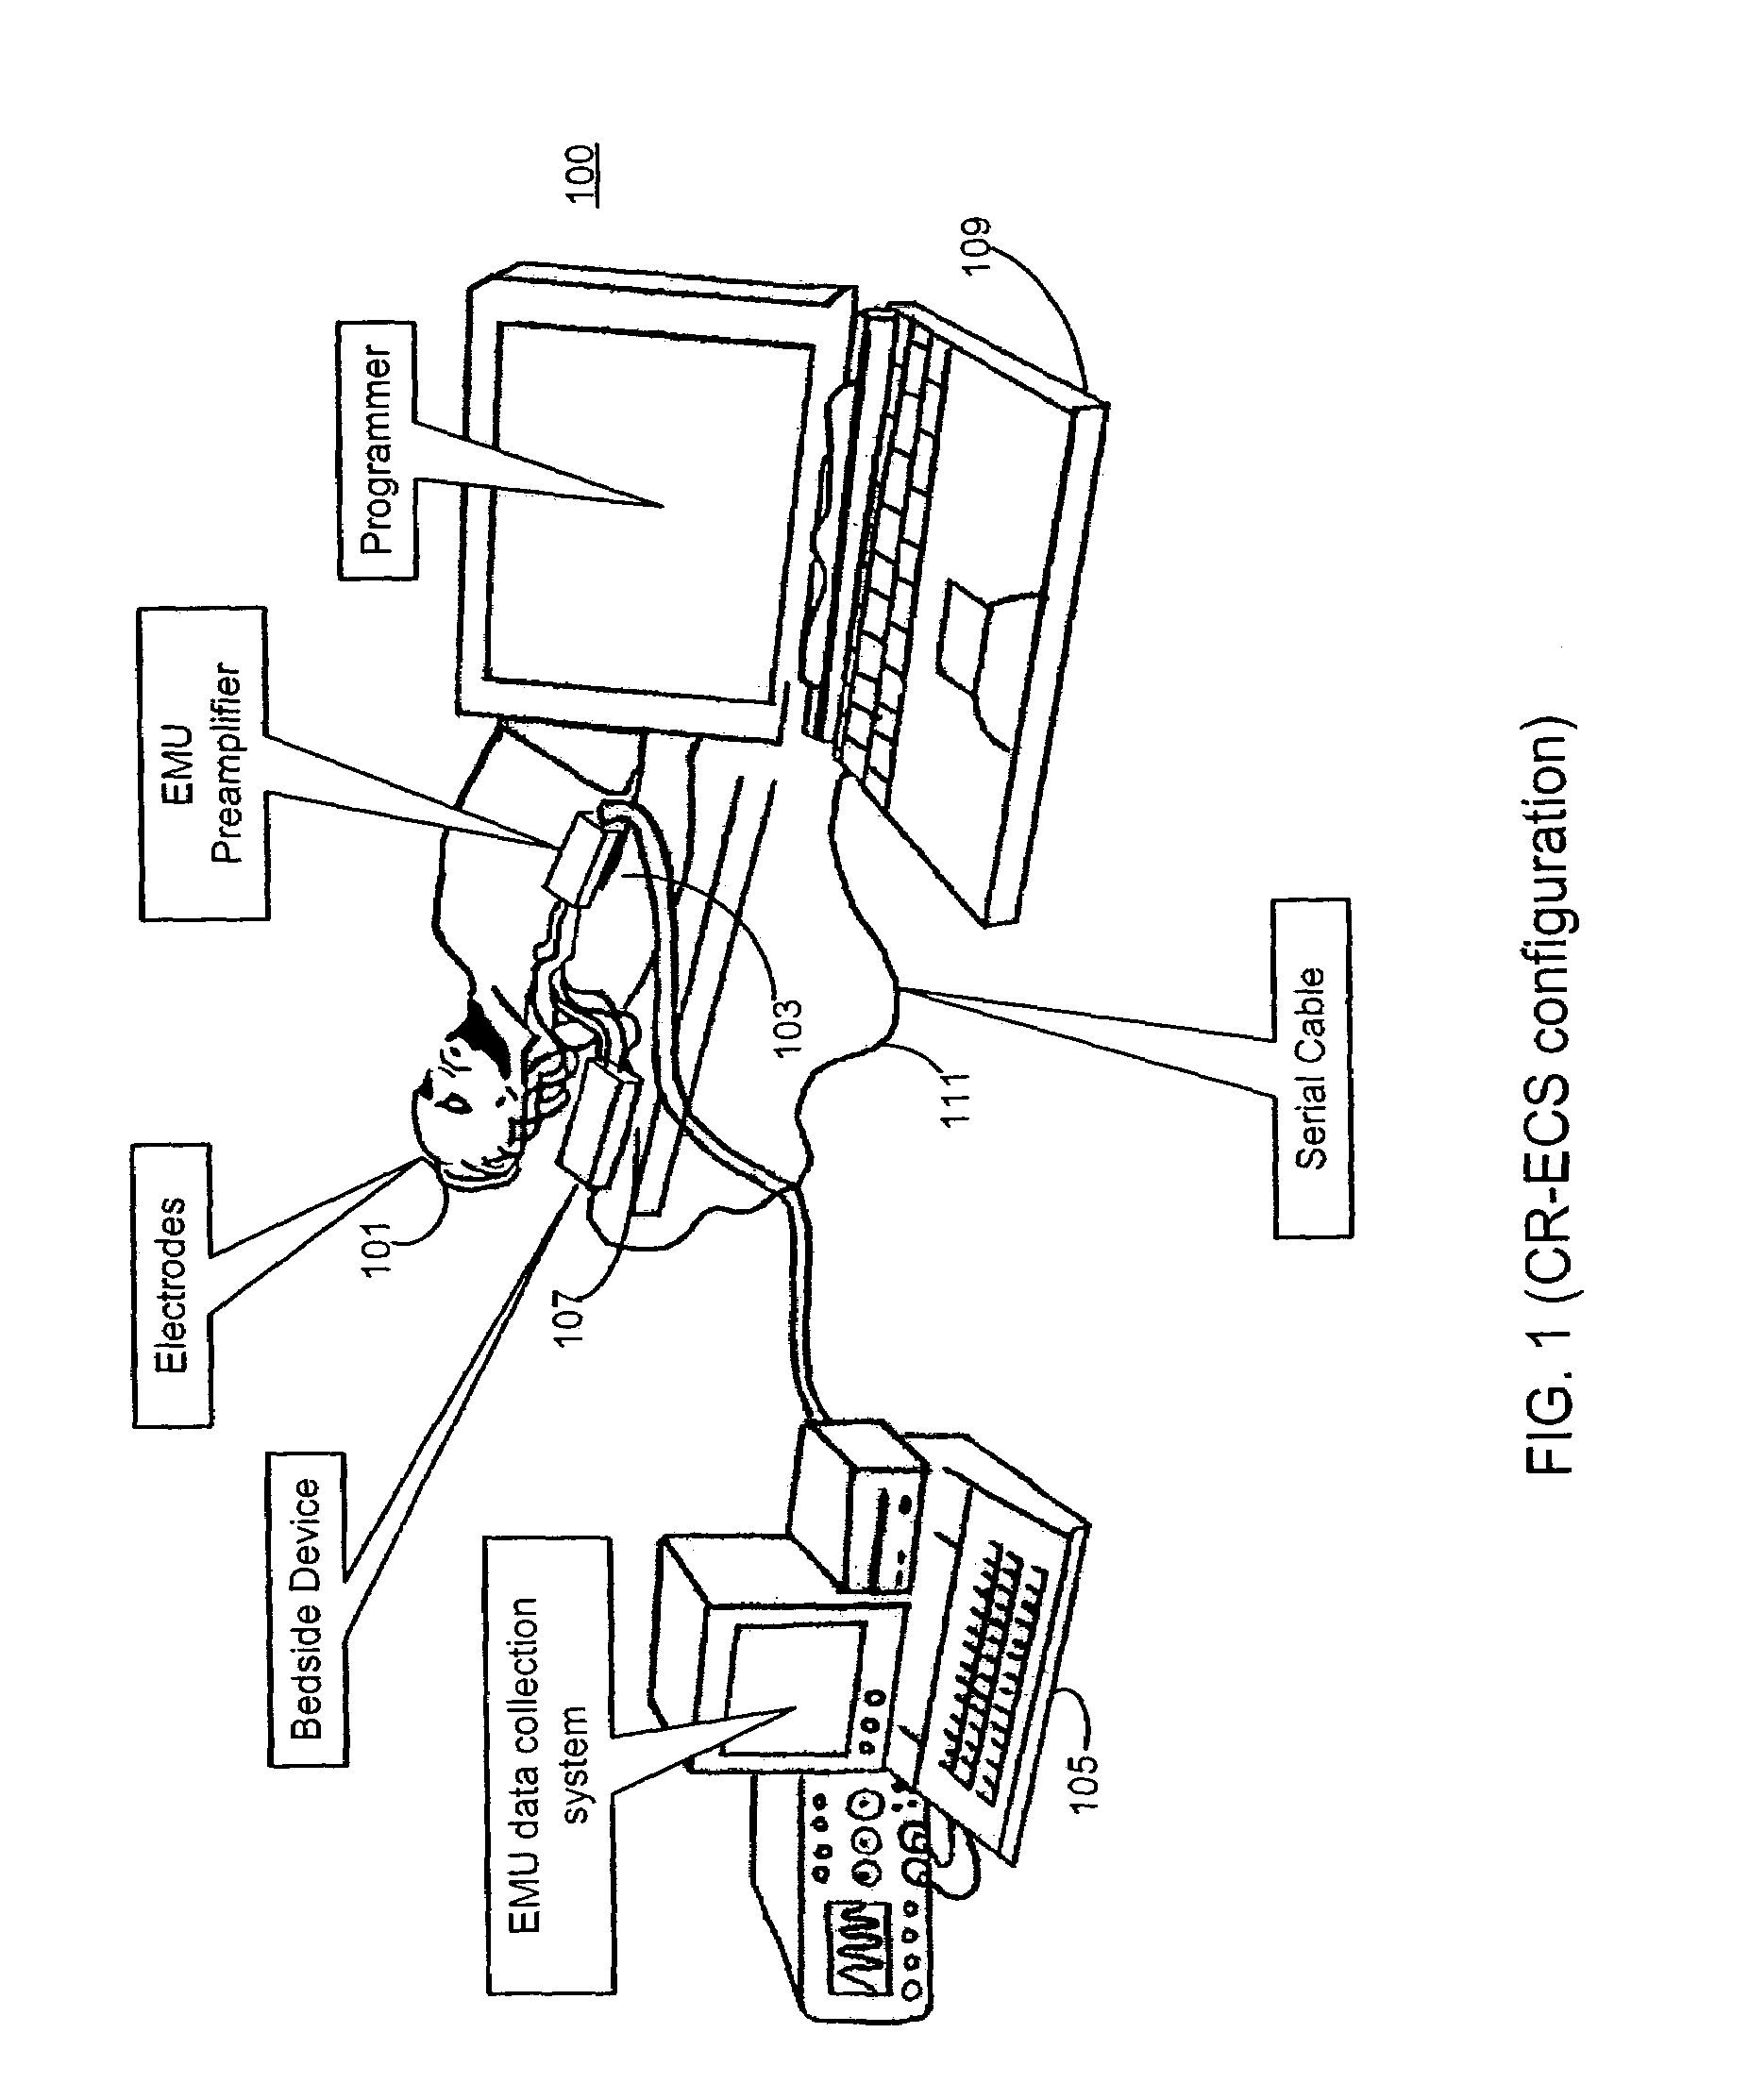 Signal quality monitoring and control for a medical device system